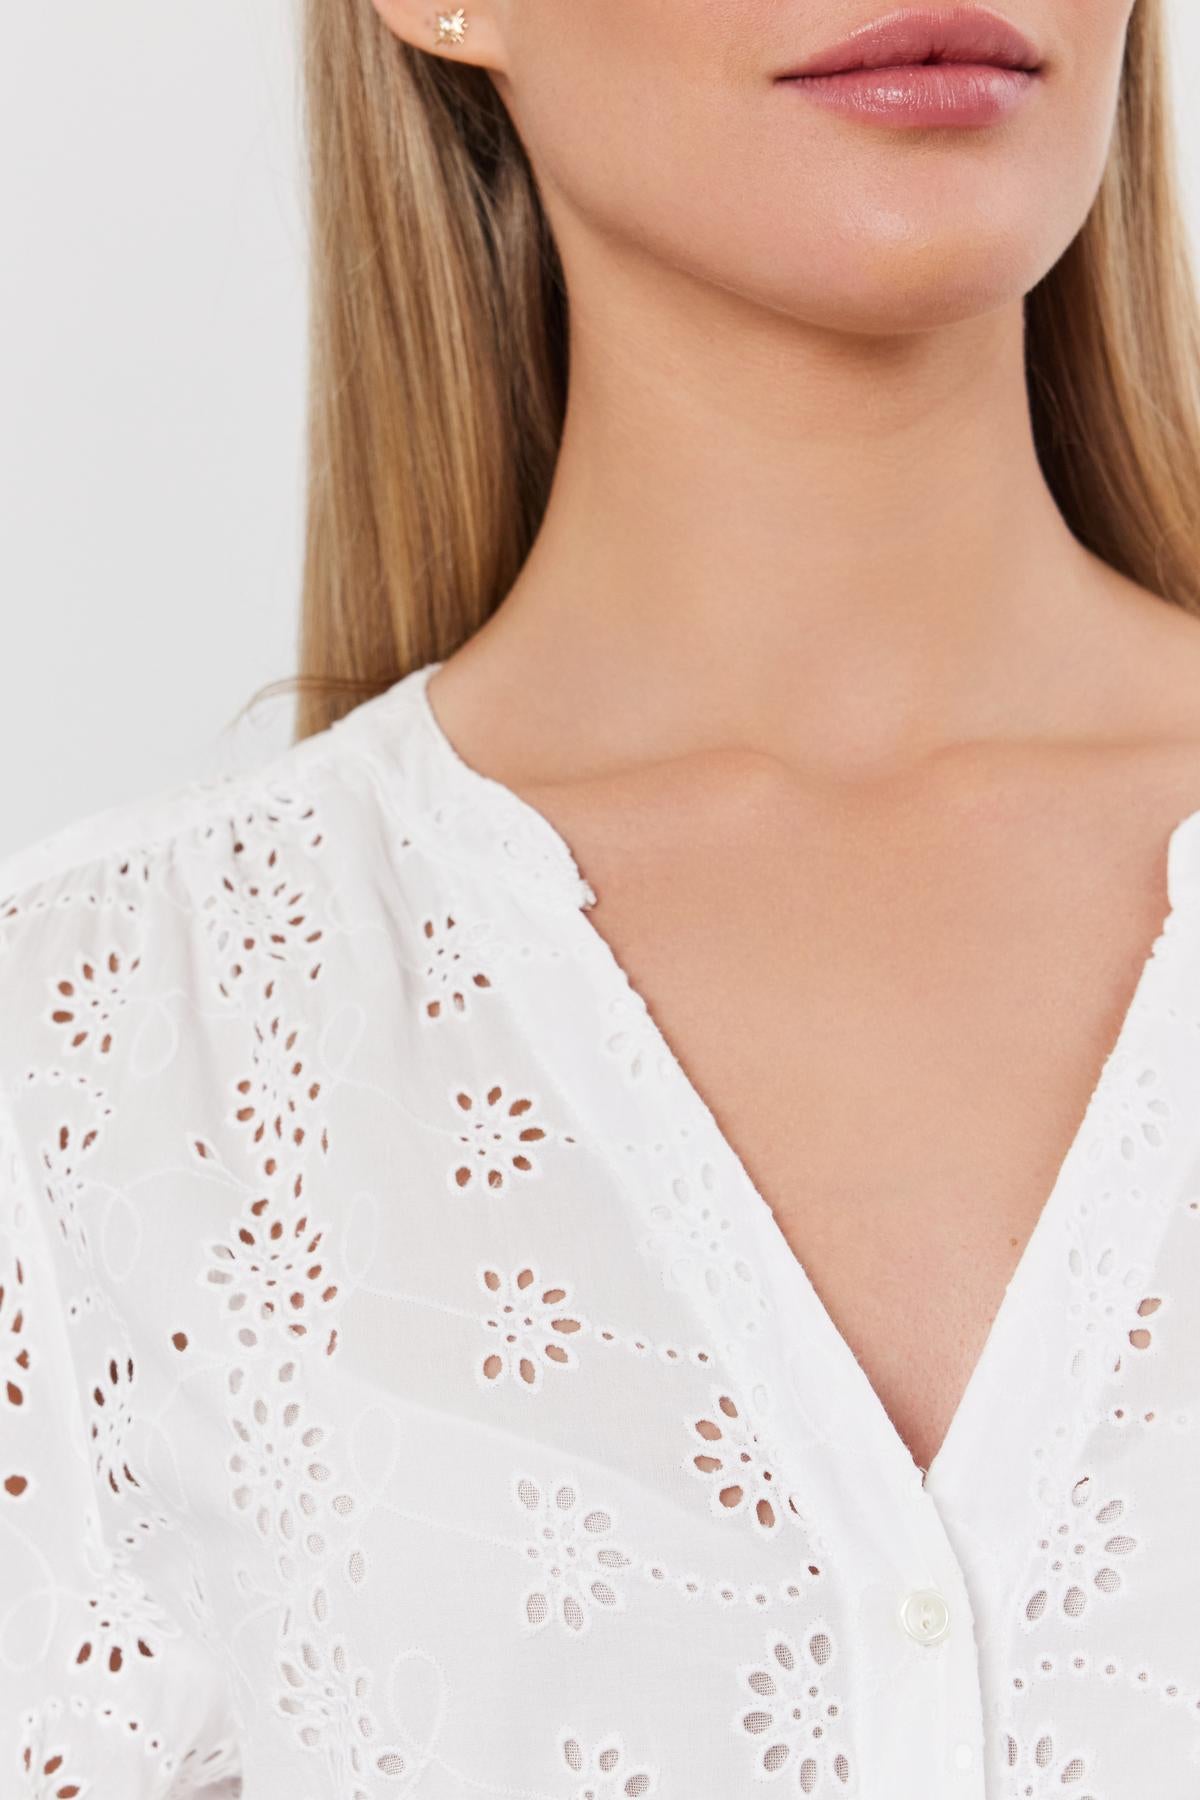 Close-up of a woman wearing a white cotton eyelet RORI DRESS by Velvet by Graham & Spencer with puff sleeves, focusing on the detailed fabric pattern and a small earring.-36910268022977